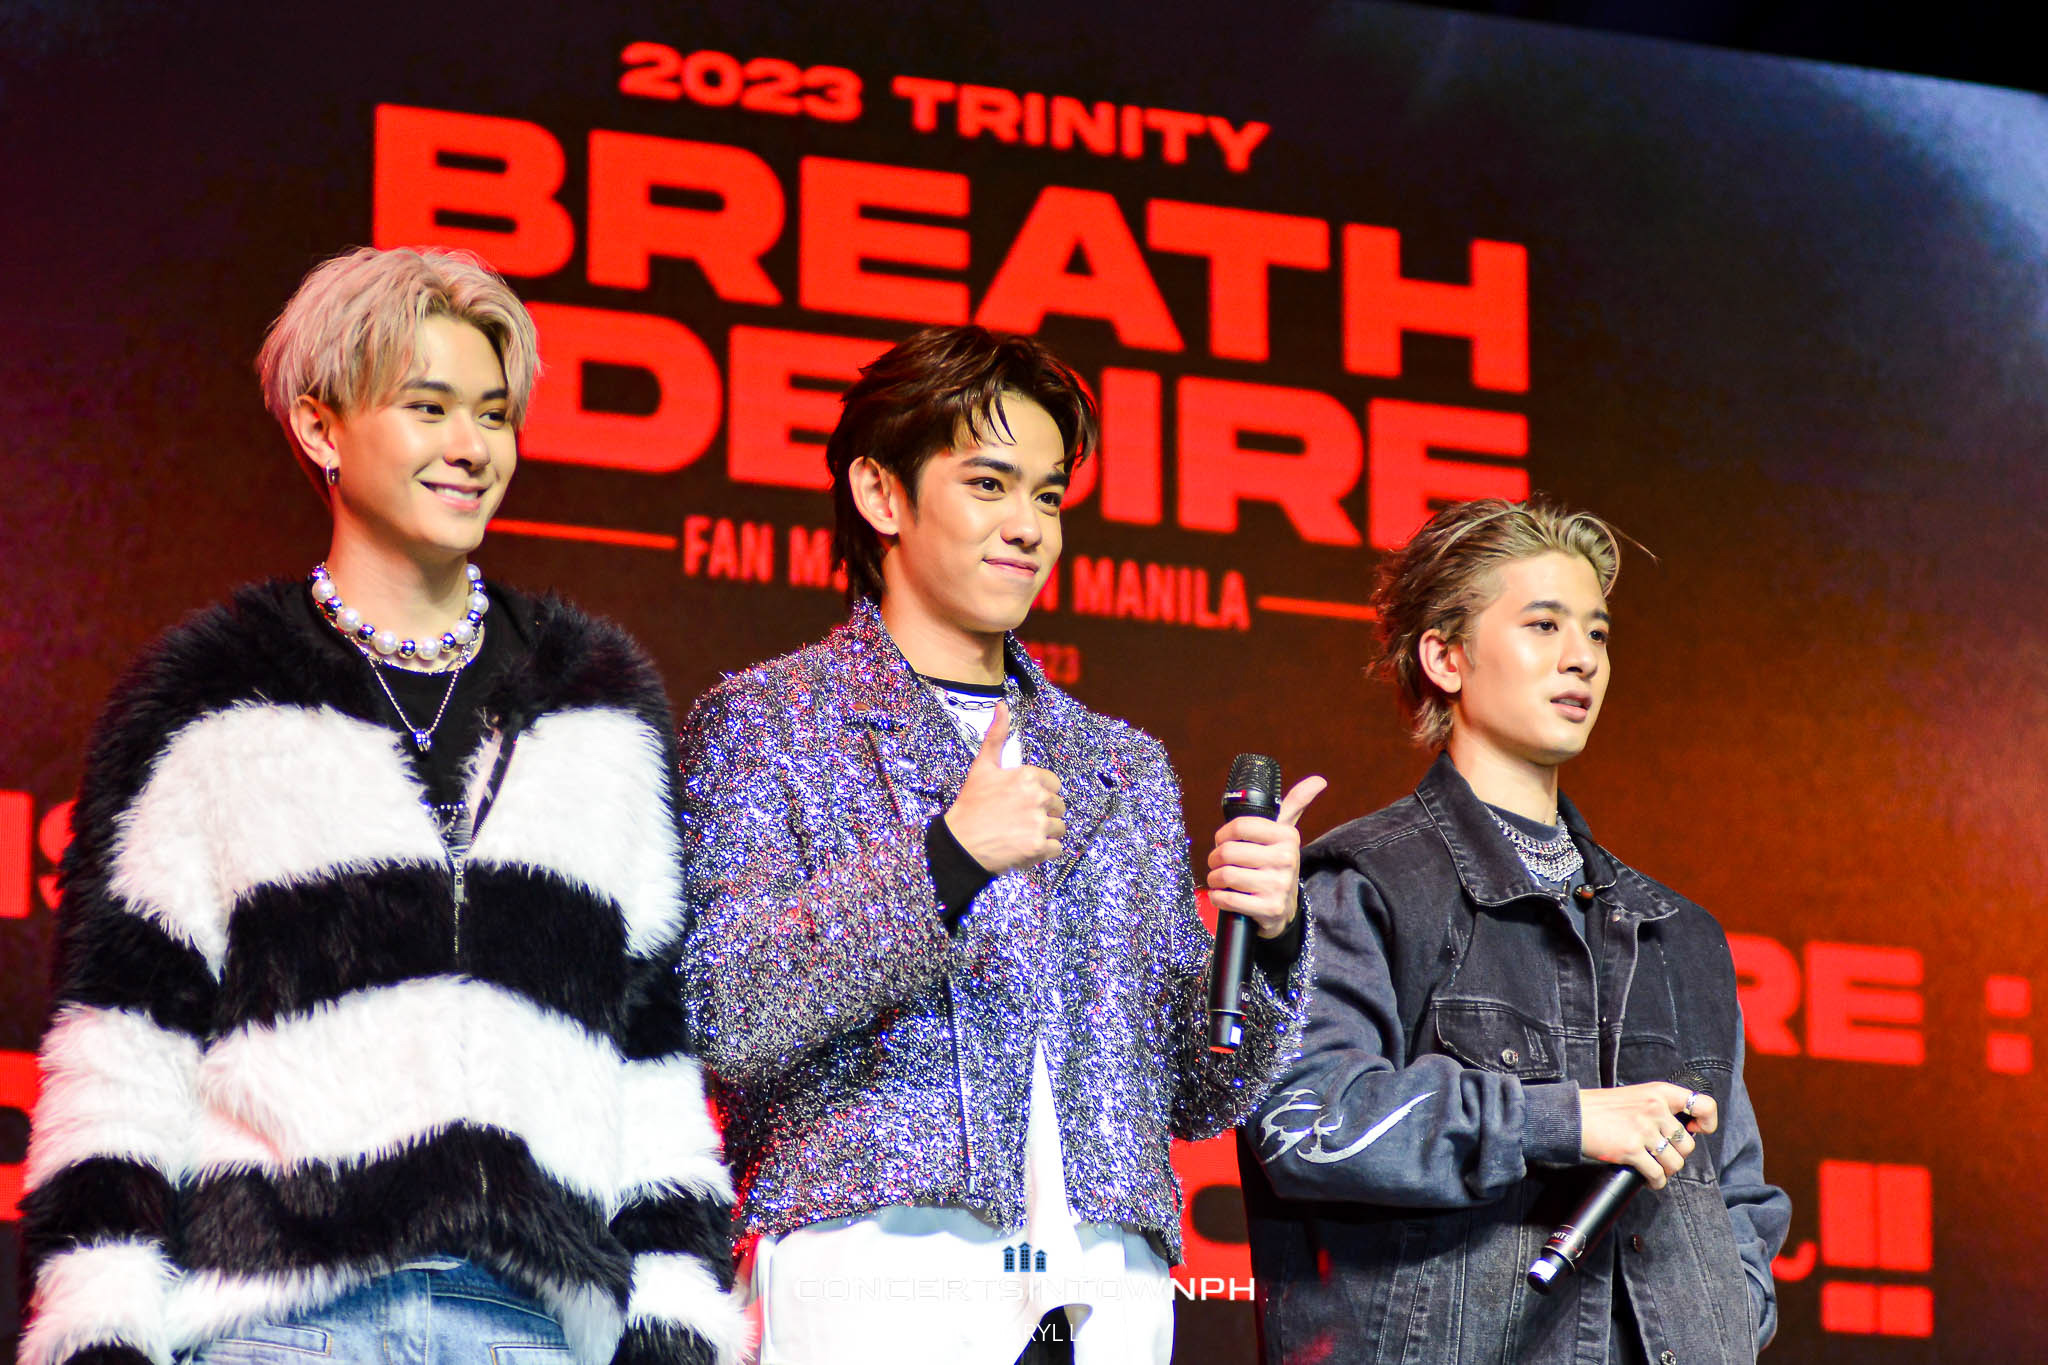 Pinoy fans give Trinity a warm welcome in their Manila debut 